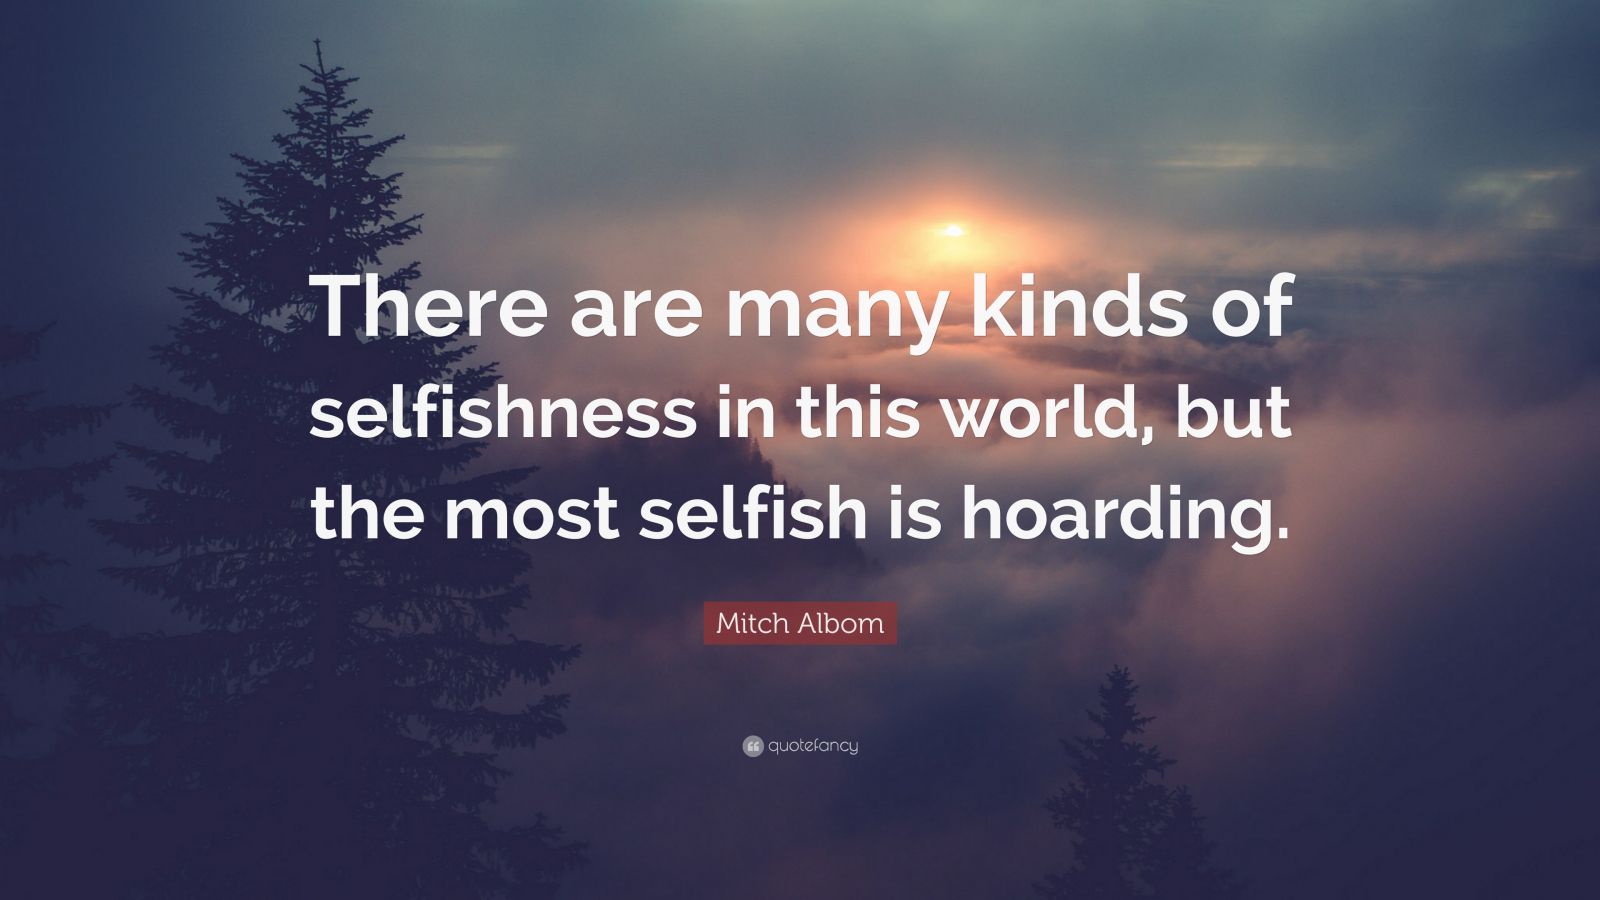 Mitch Albom Quote: “There are many kinds of selfishness in this world ...